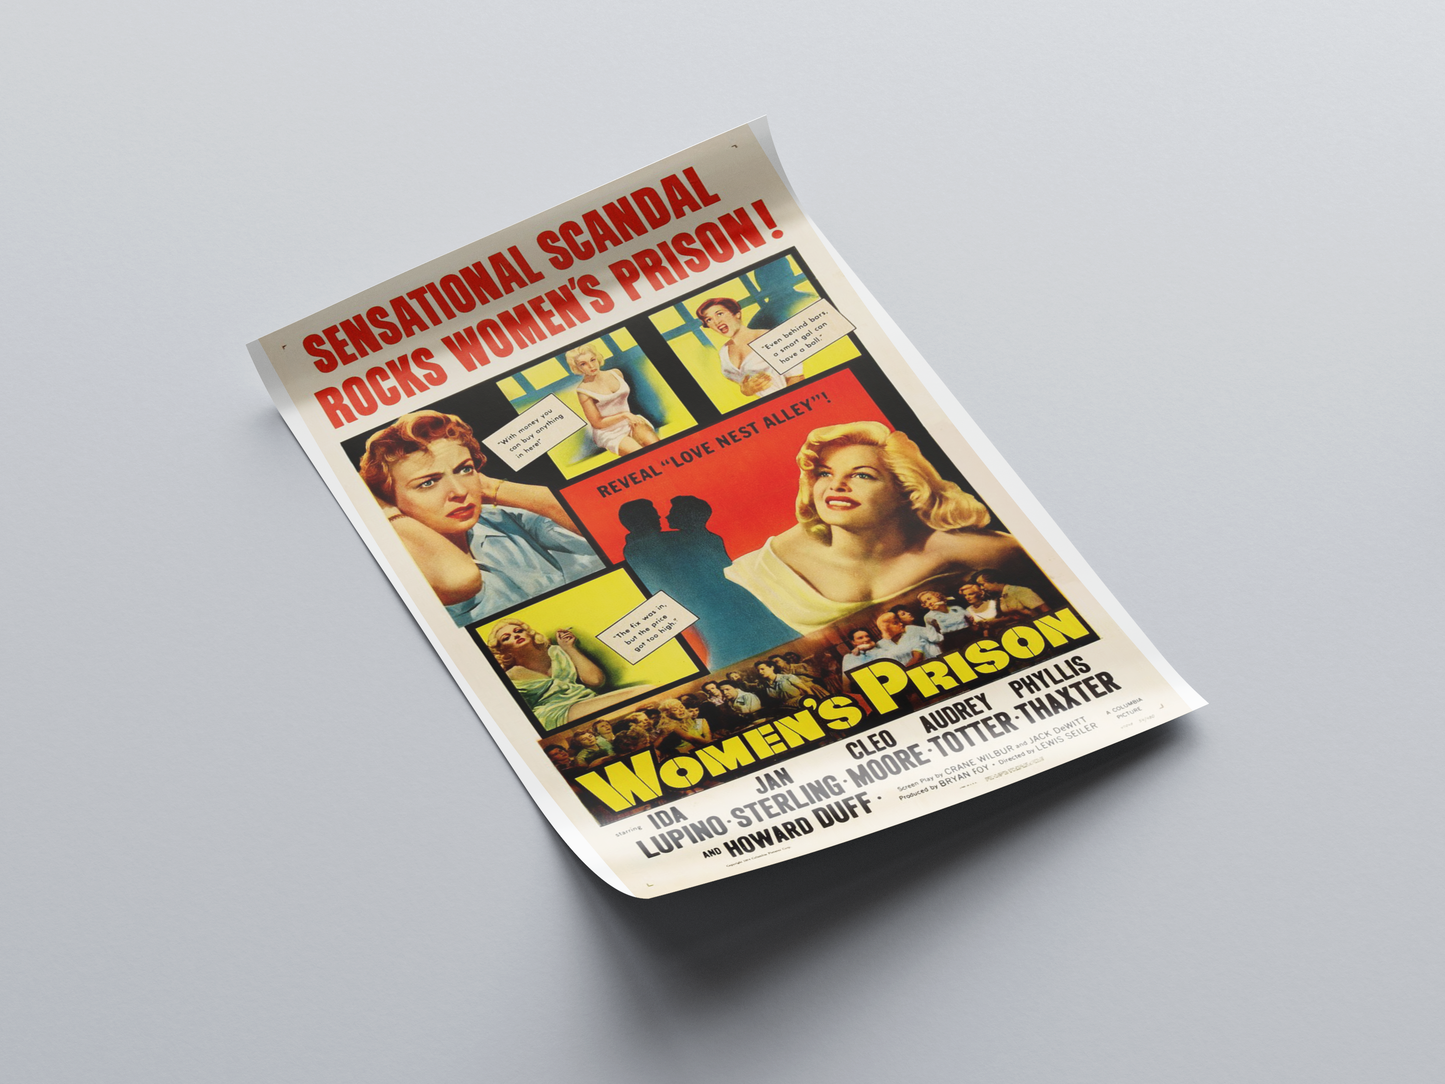 Women's Prison (1955) Movie Poster displayed in interior setting